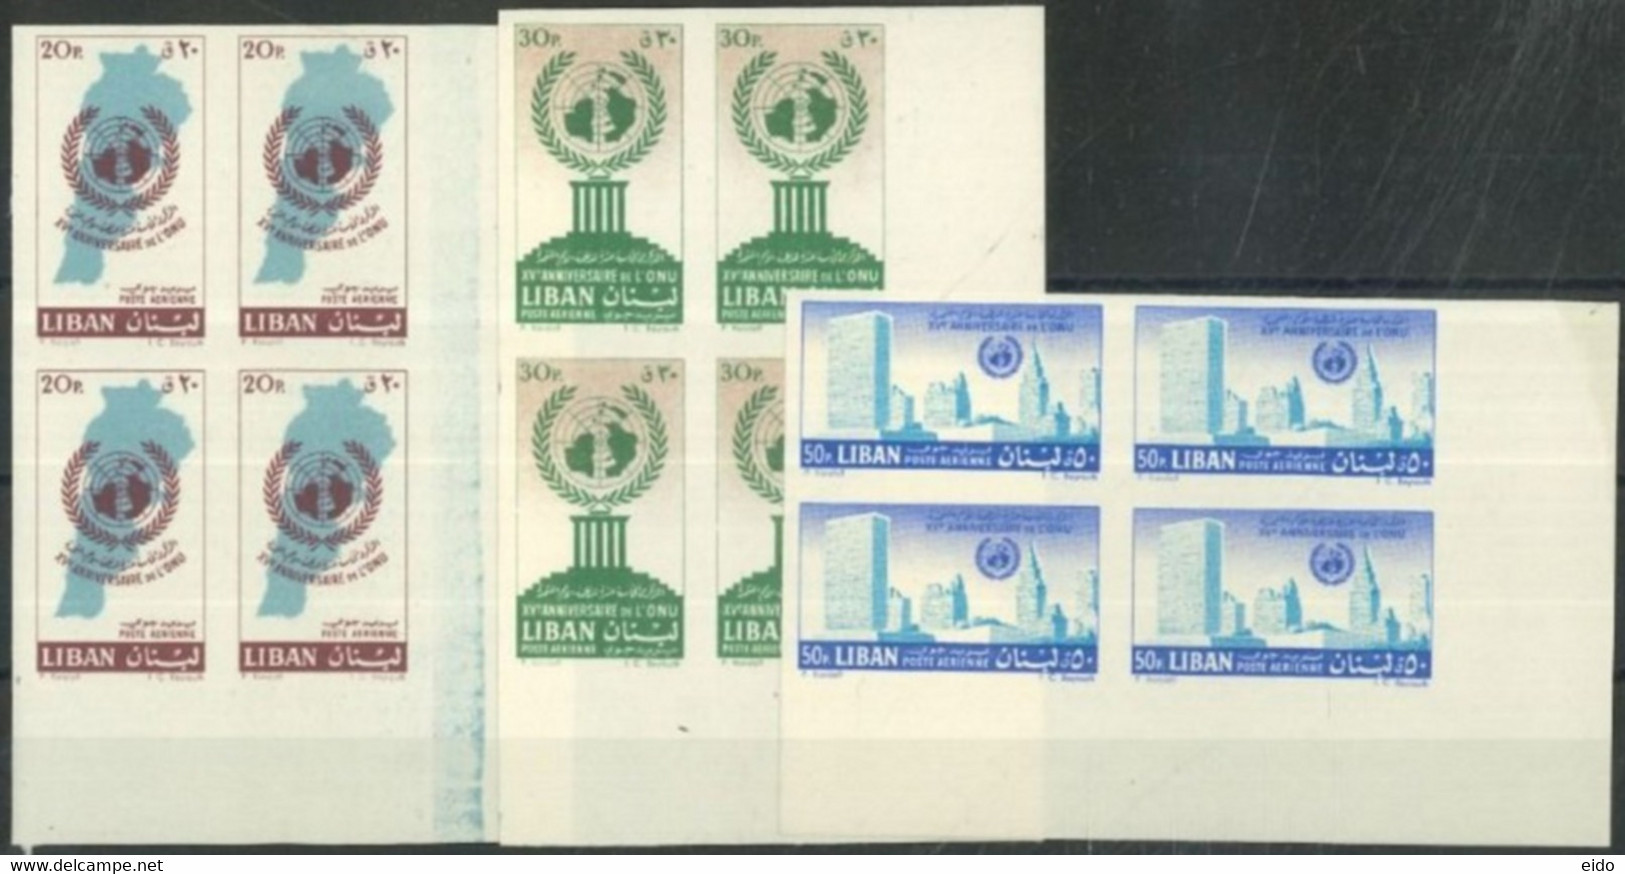 LEBANON - 1961 - 15TH. ANNIVERSARY OF U.N, ORGANISATION IMPERFORATED STAMPS SET BLOCK OF FOUR, SG # 683/685 - Liban